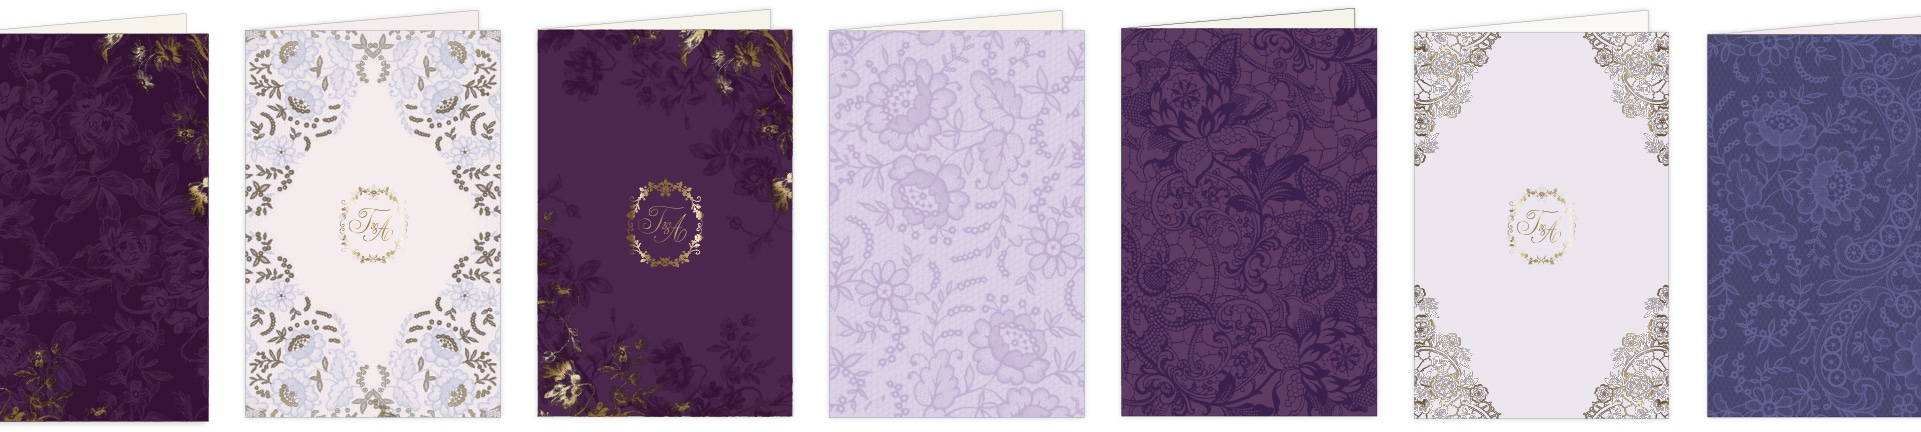 Purple lace and floral folders